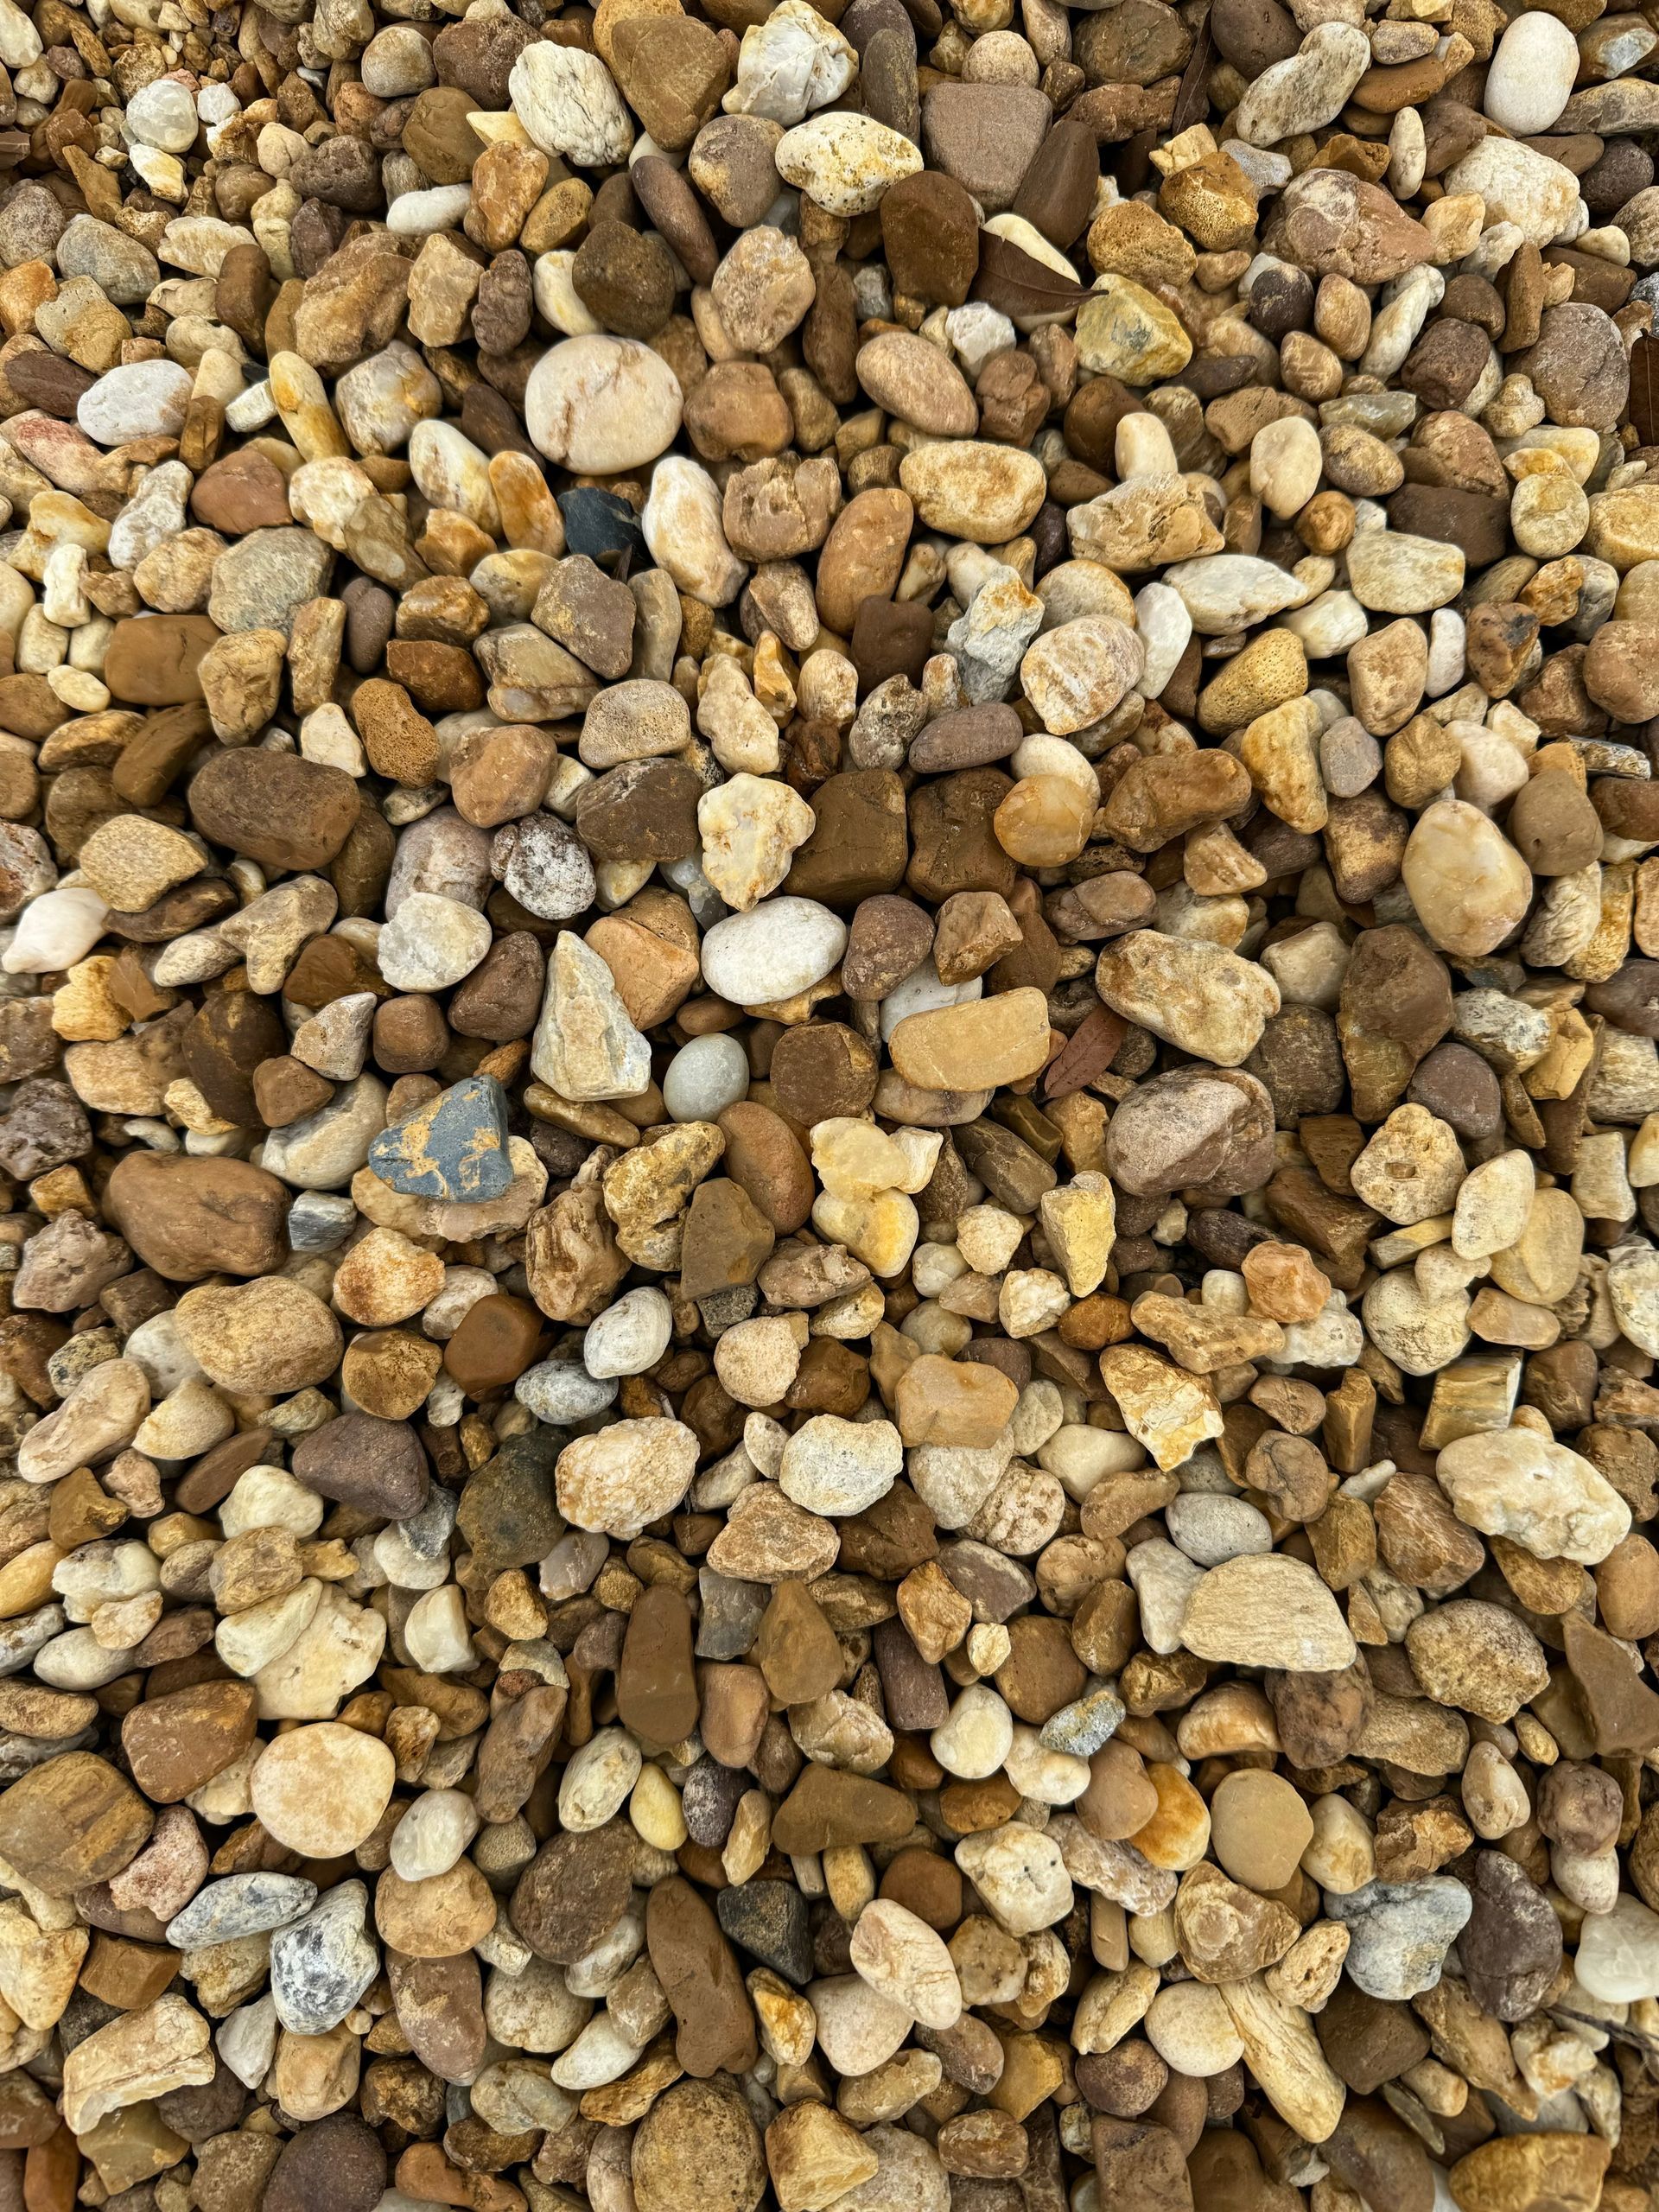 Gray granite - Gravel Products in Florida